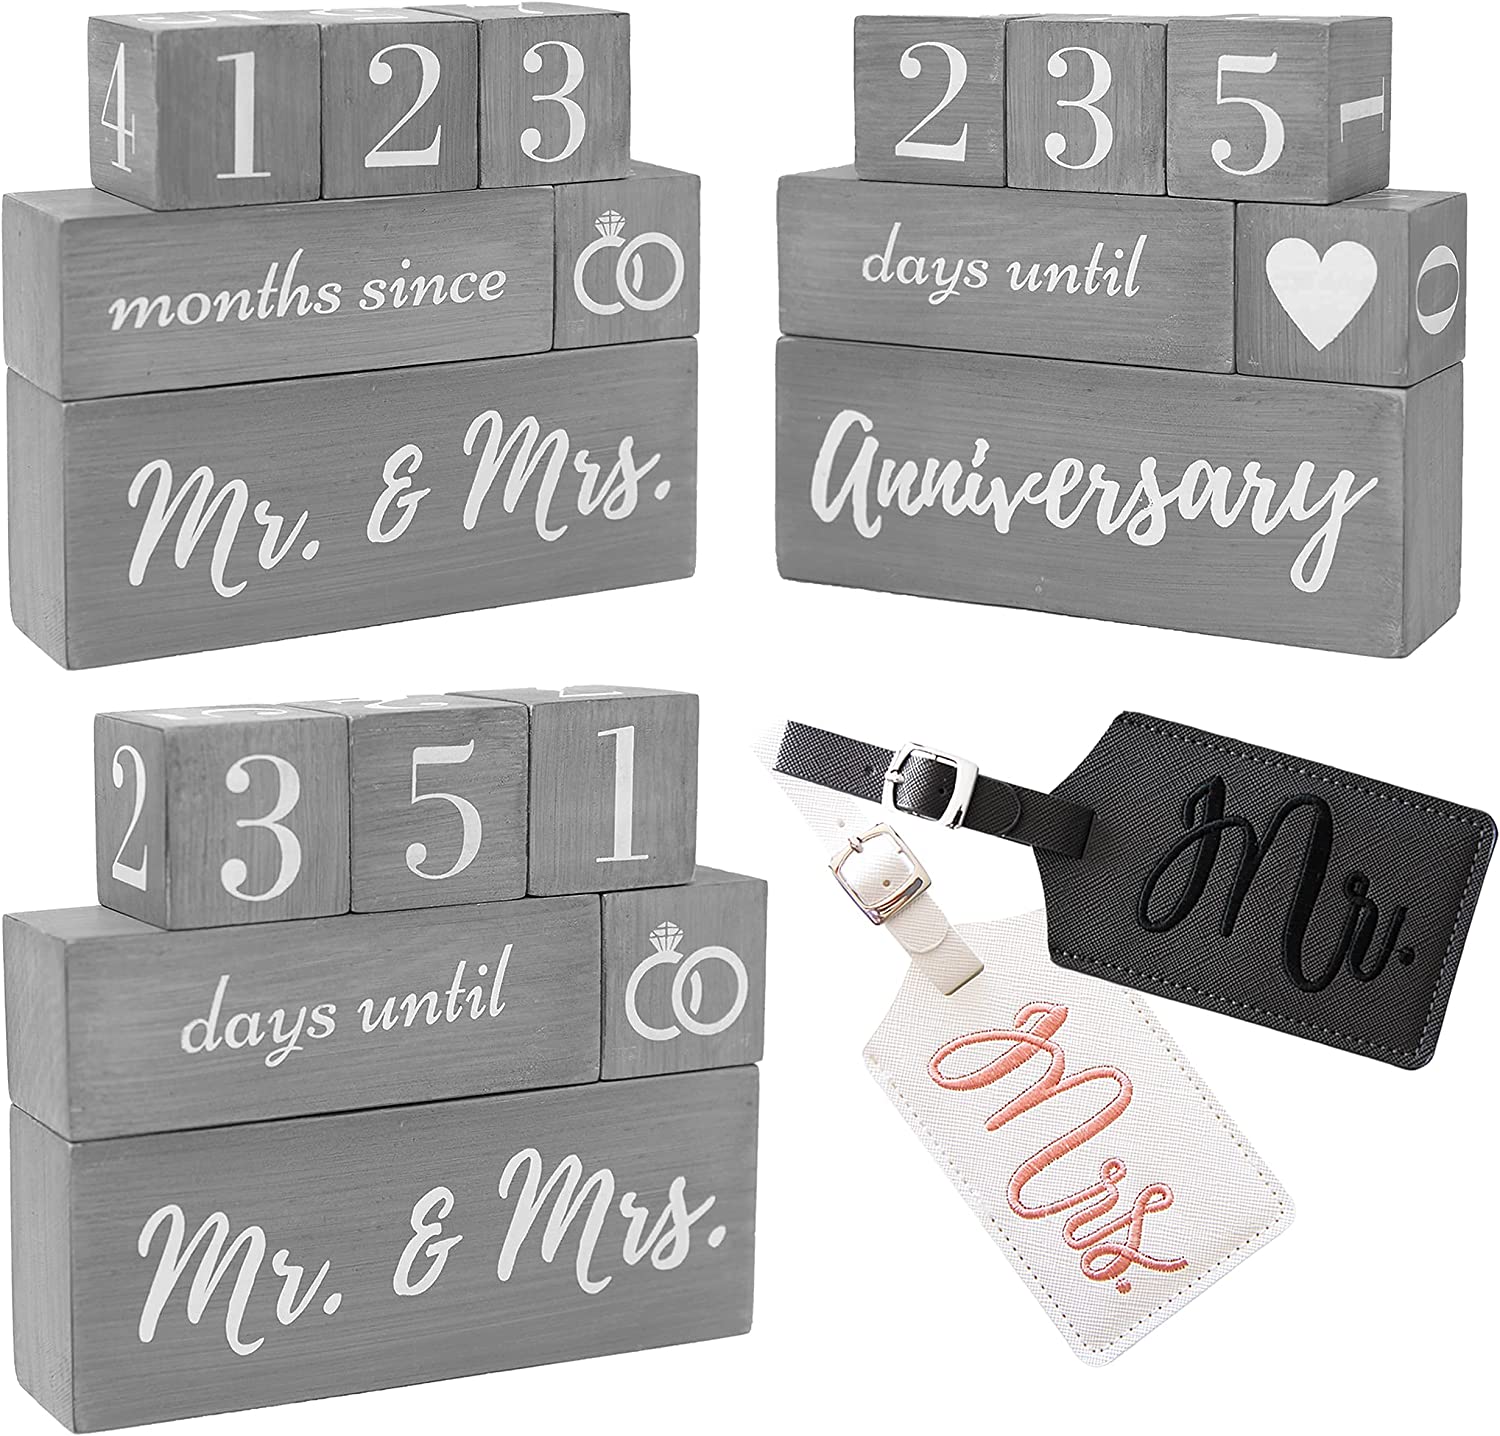 Wedding Countdown Calendar Block Mr and Mrs Luggage Tags His and Hers - 2 Item Gift Set | Reversible Text Block for Marriage, Anniversary Engagement Gifts for Couples, Bride to Be by The Seven Days Home Store